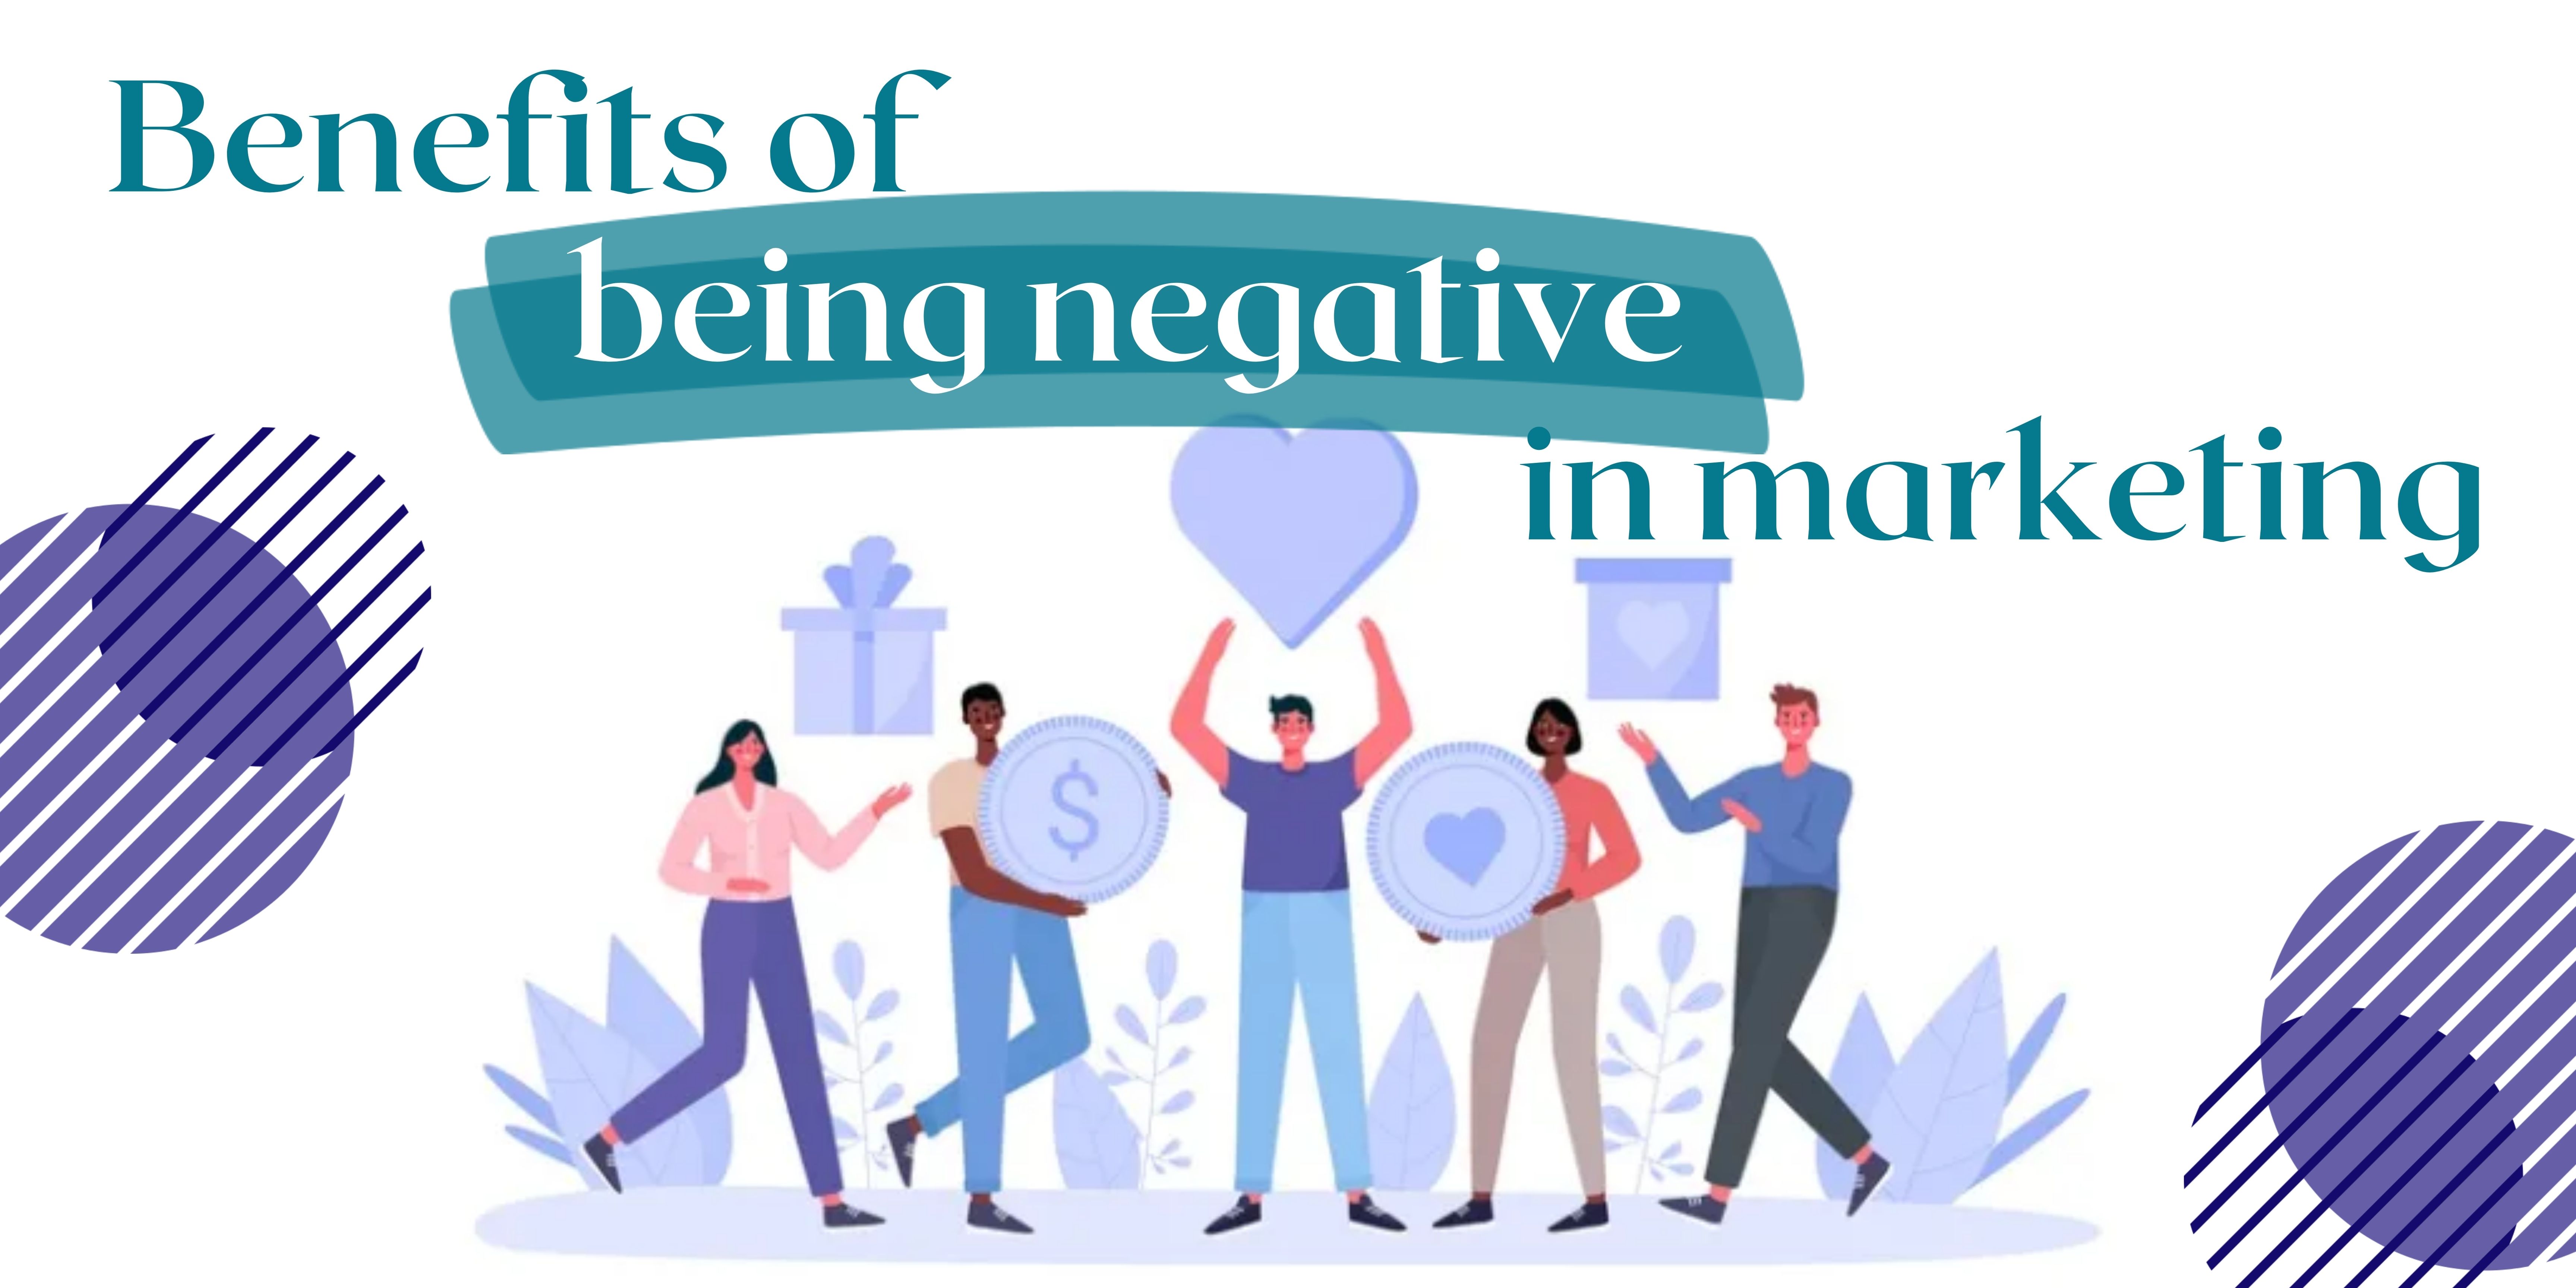 Benefits of being negative in marketing